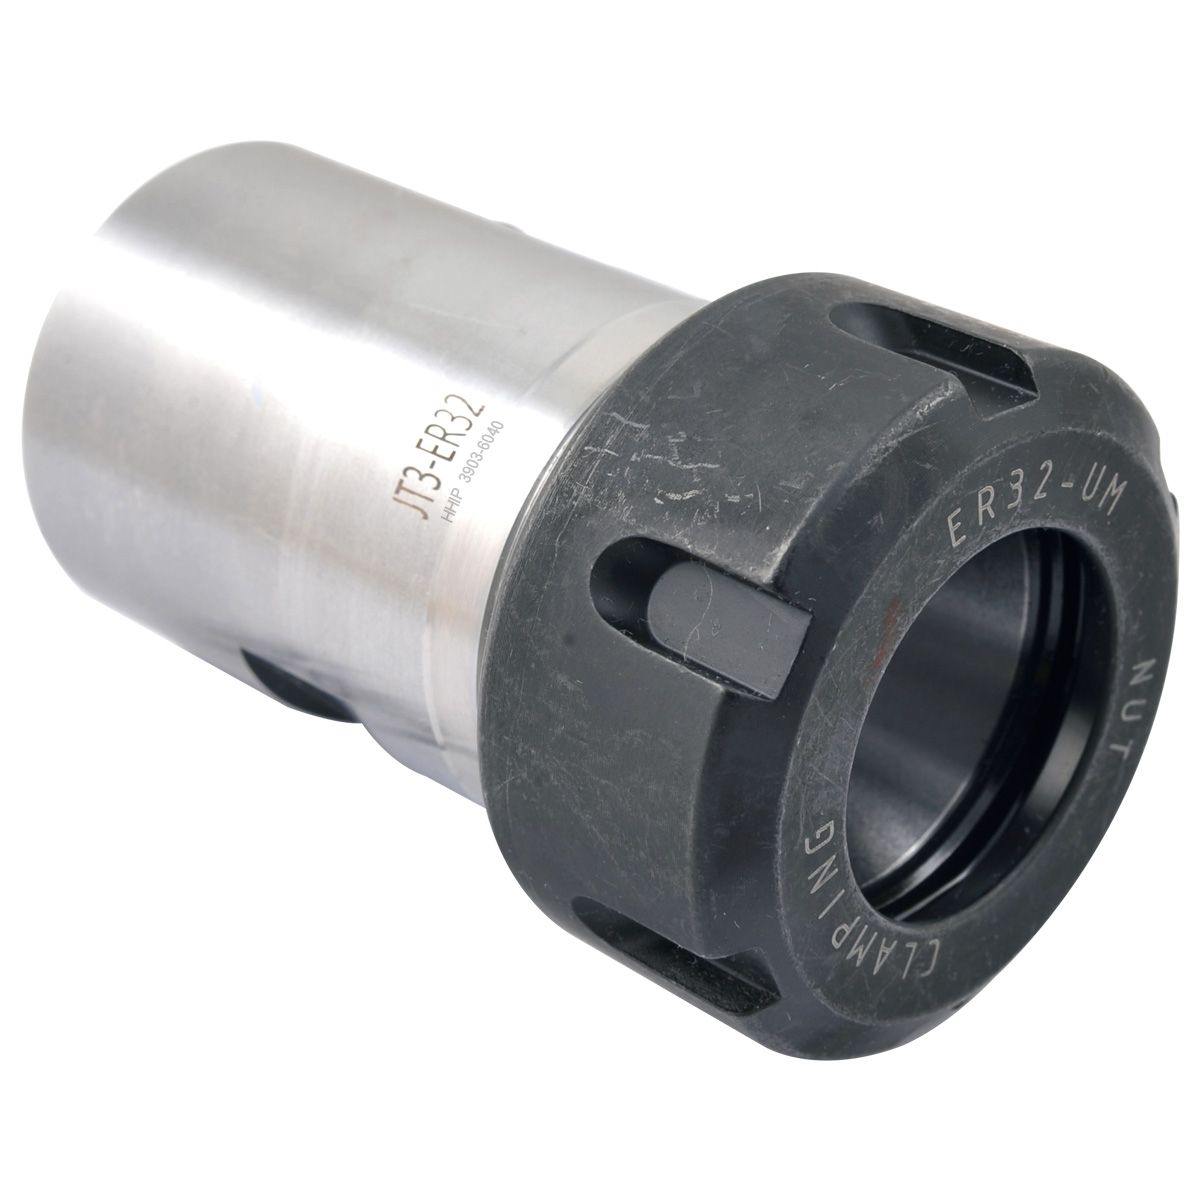 ER32 COLLET & DRILL CHUCK WITH JT3 SLEEVE (3903-6040)